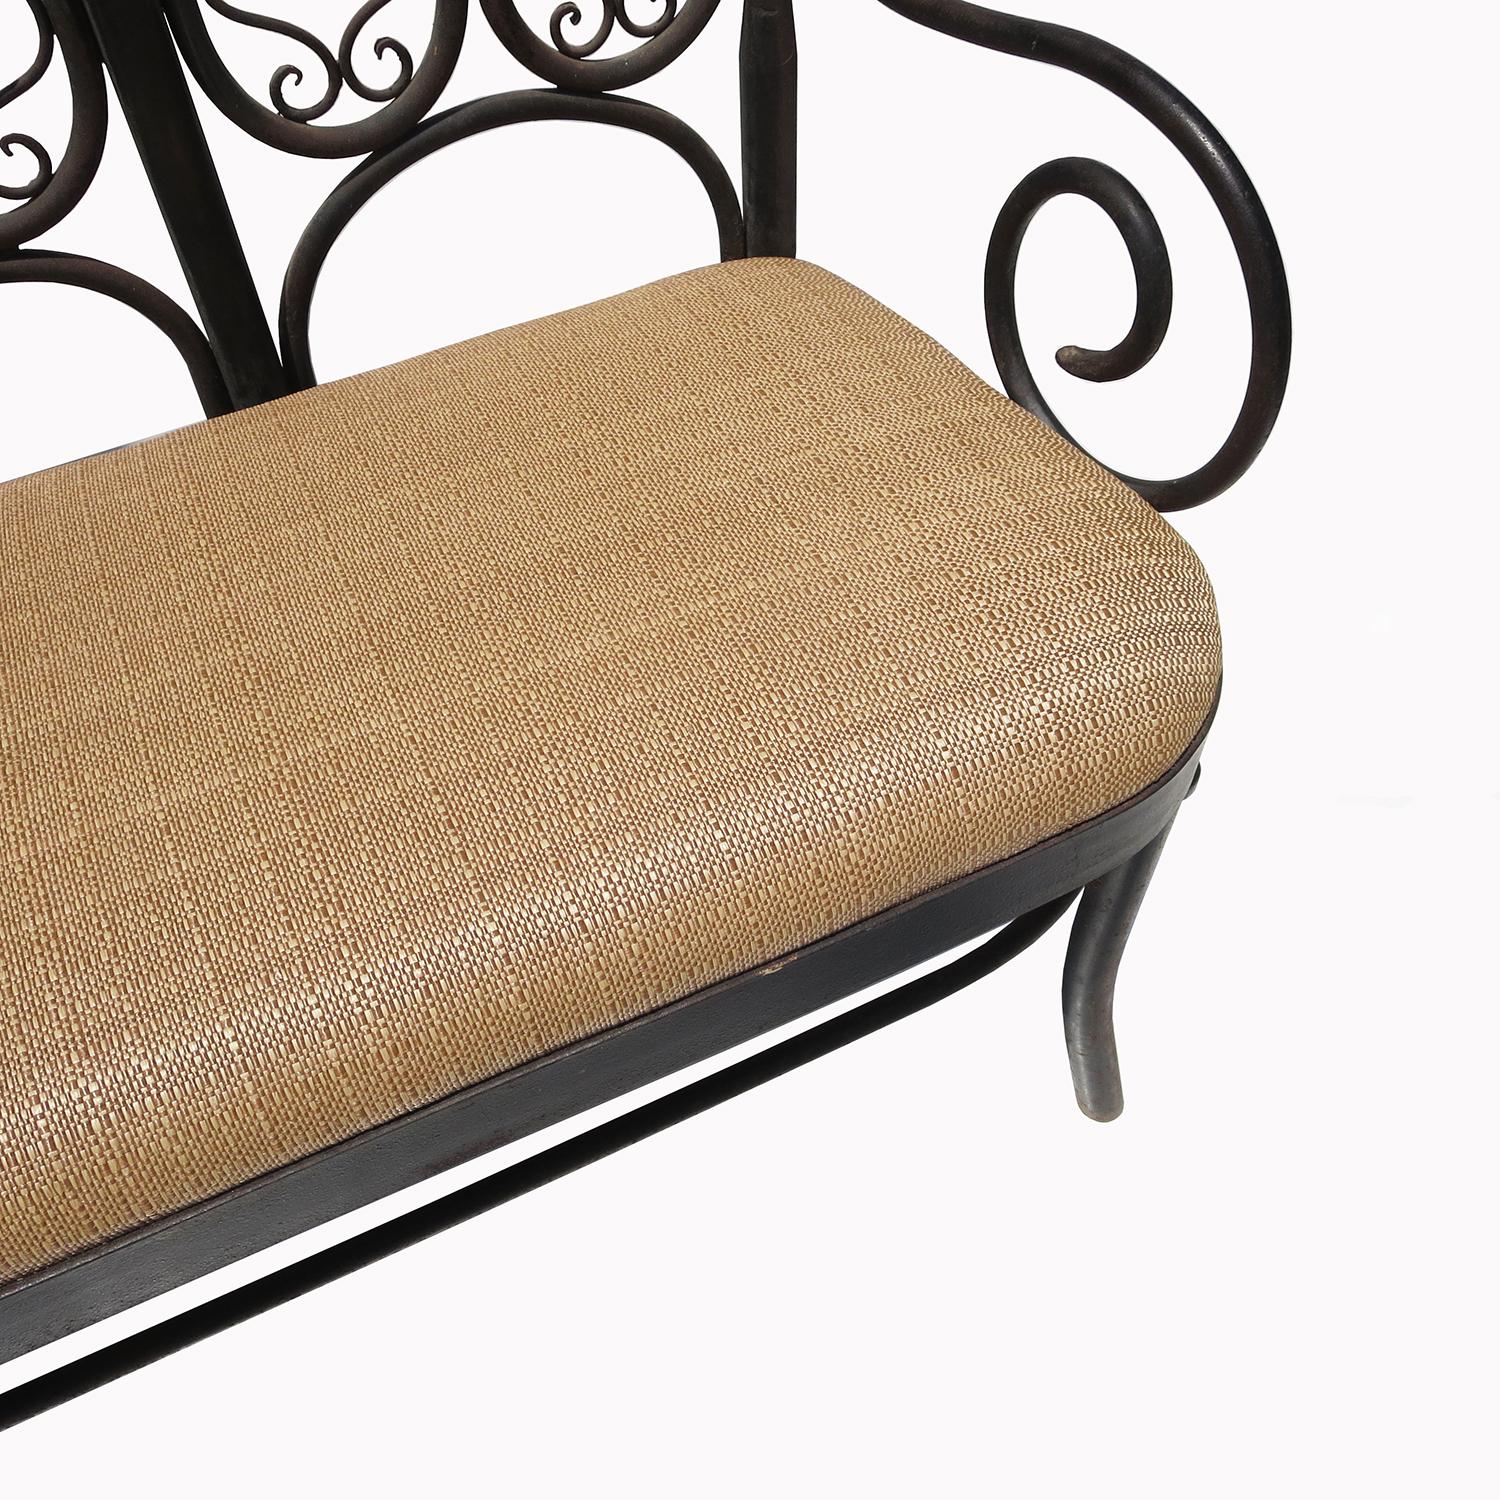 This wonderful bench is unlike others we have seen. All metals are solid iron, including the thicker legs. The bench is solid and heavy! The quality of the handwrought bending and the overall pleasing design show this to be the work of a very